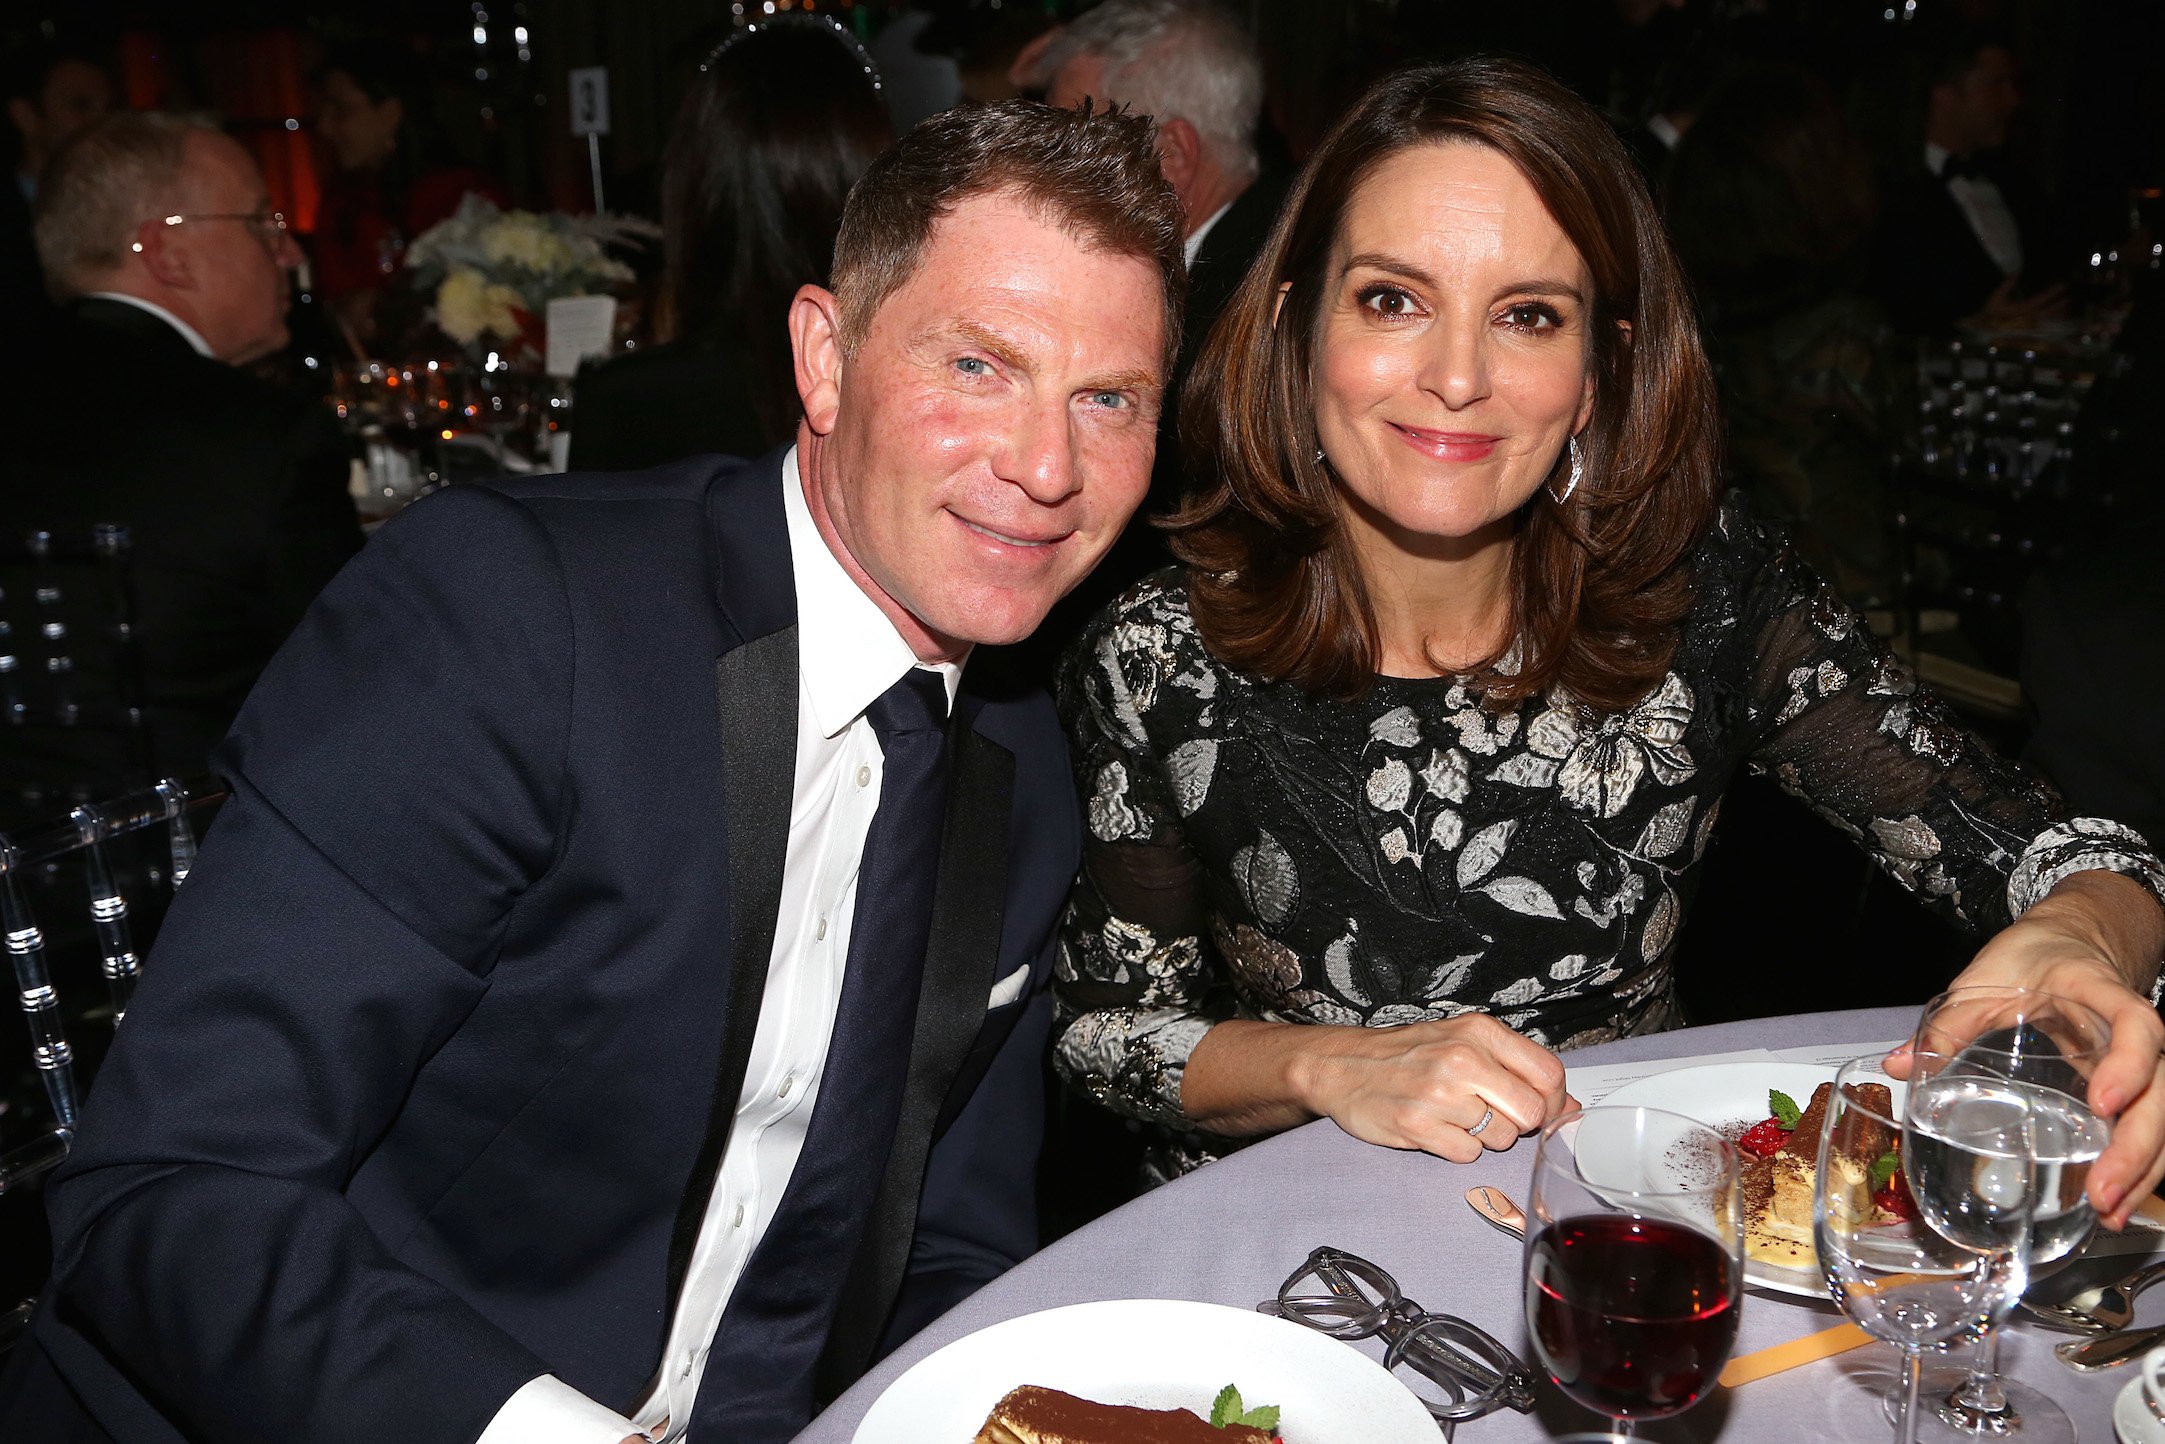 Bobby Flay and Tina Fey attend The American Museum of Natural History's 2019 Museum Gala